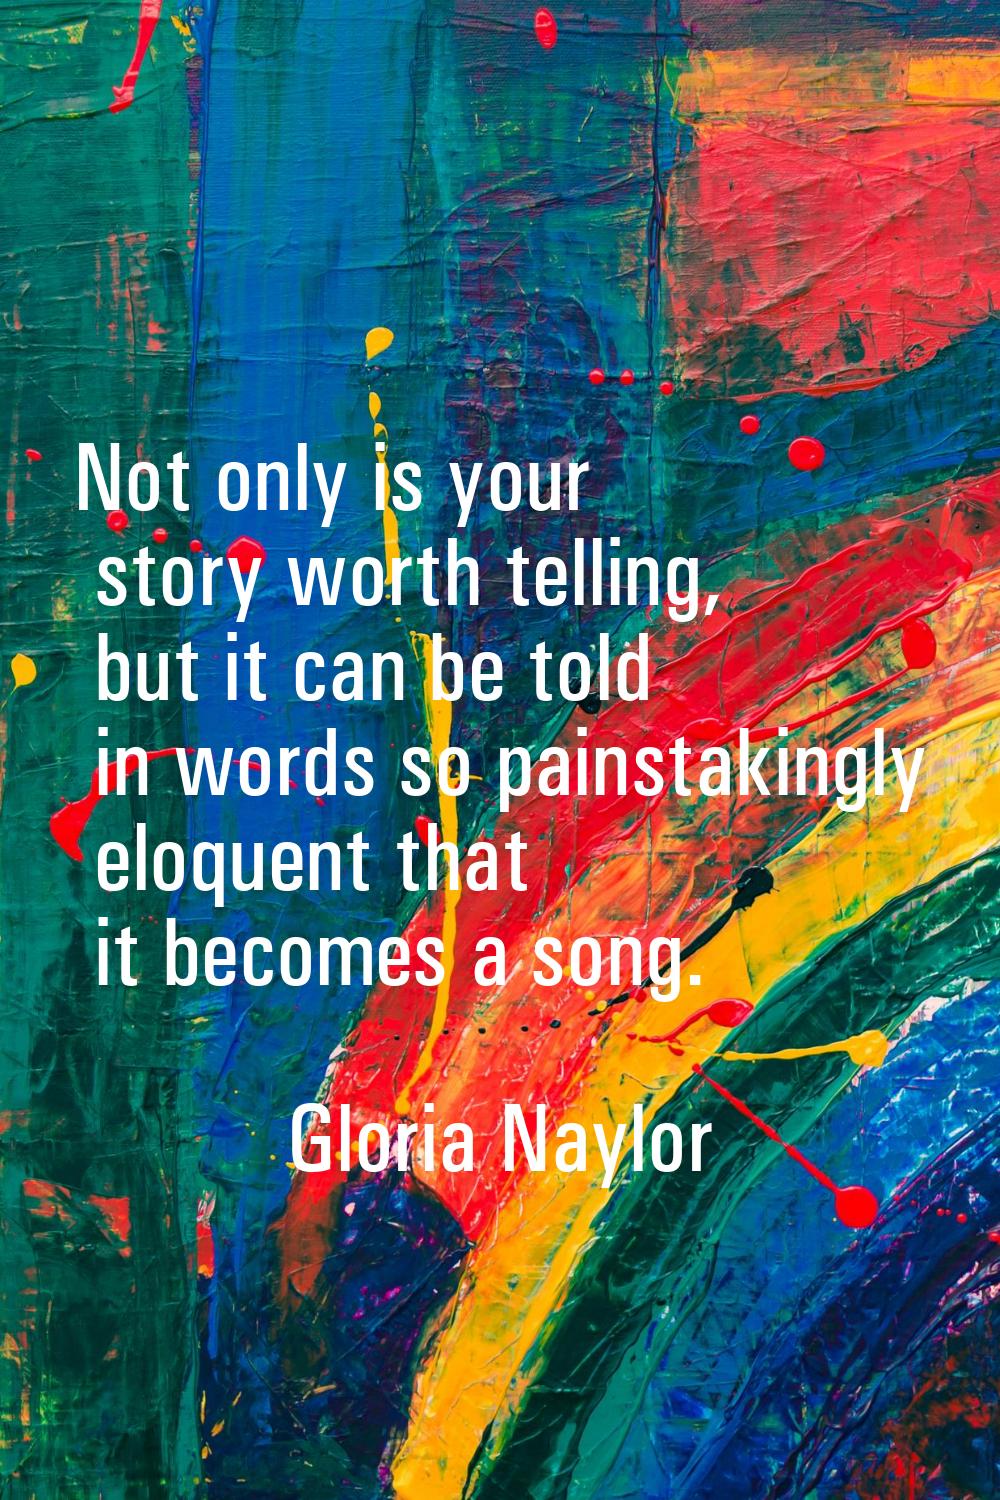 Not only is your story worth telling, but it can be told in words so painstakingly eloquent that it